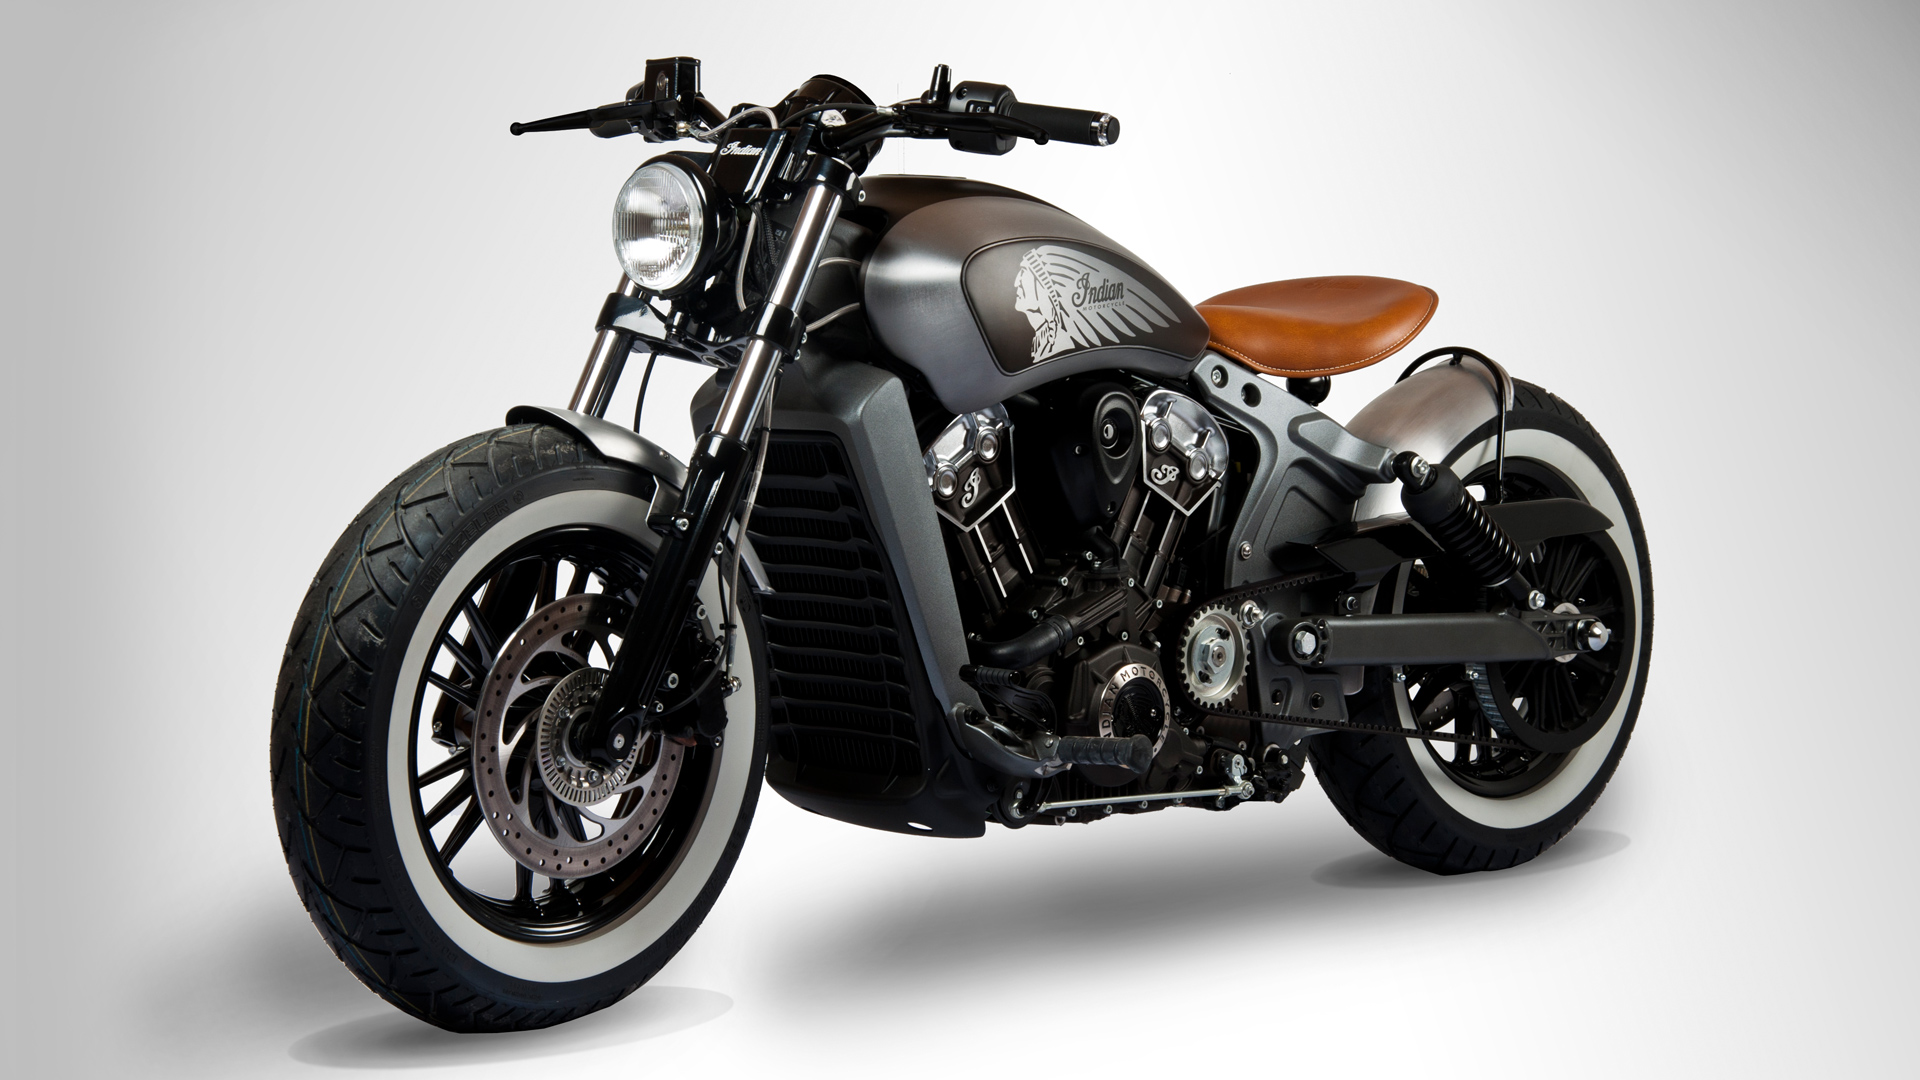 Custom part. Мотоцикл indian Scout Bobber. Scout Bobber Sixty. Мотоциклы indian Scout Bobber Custom. Мотоцикл Индиан бобер Скаут.